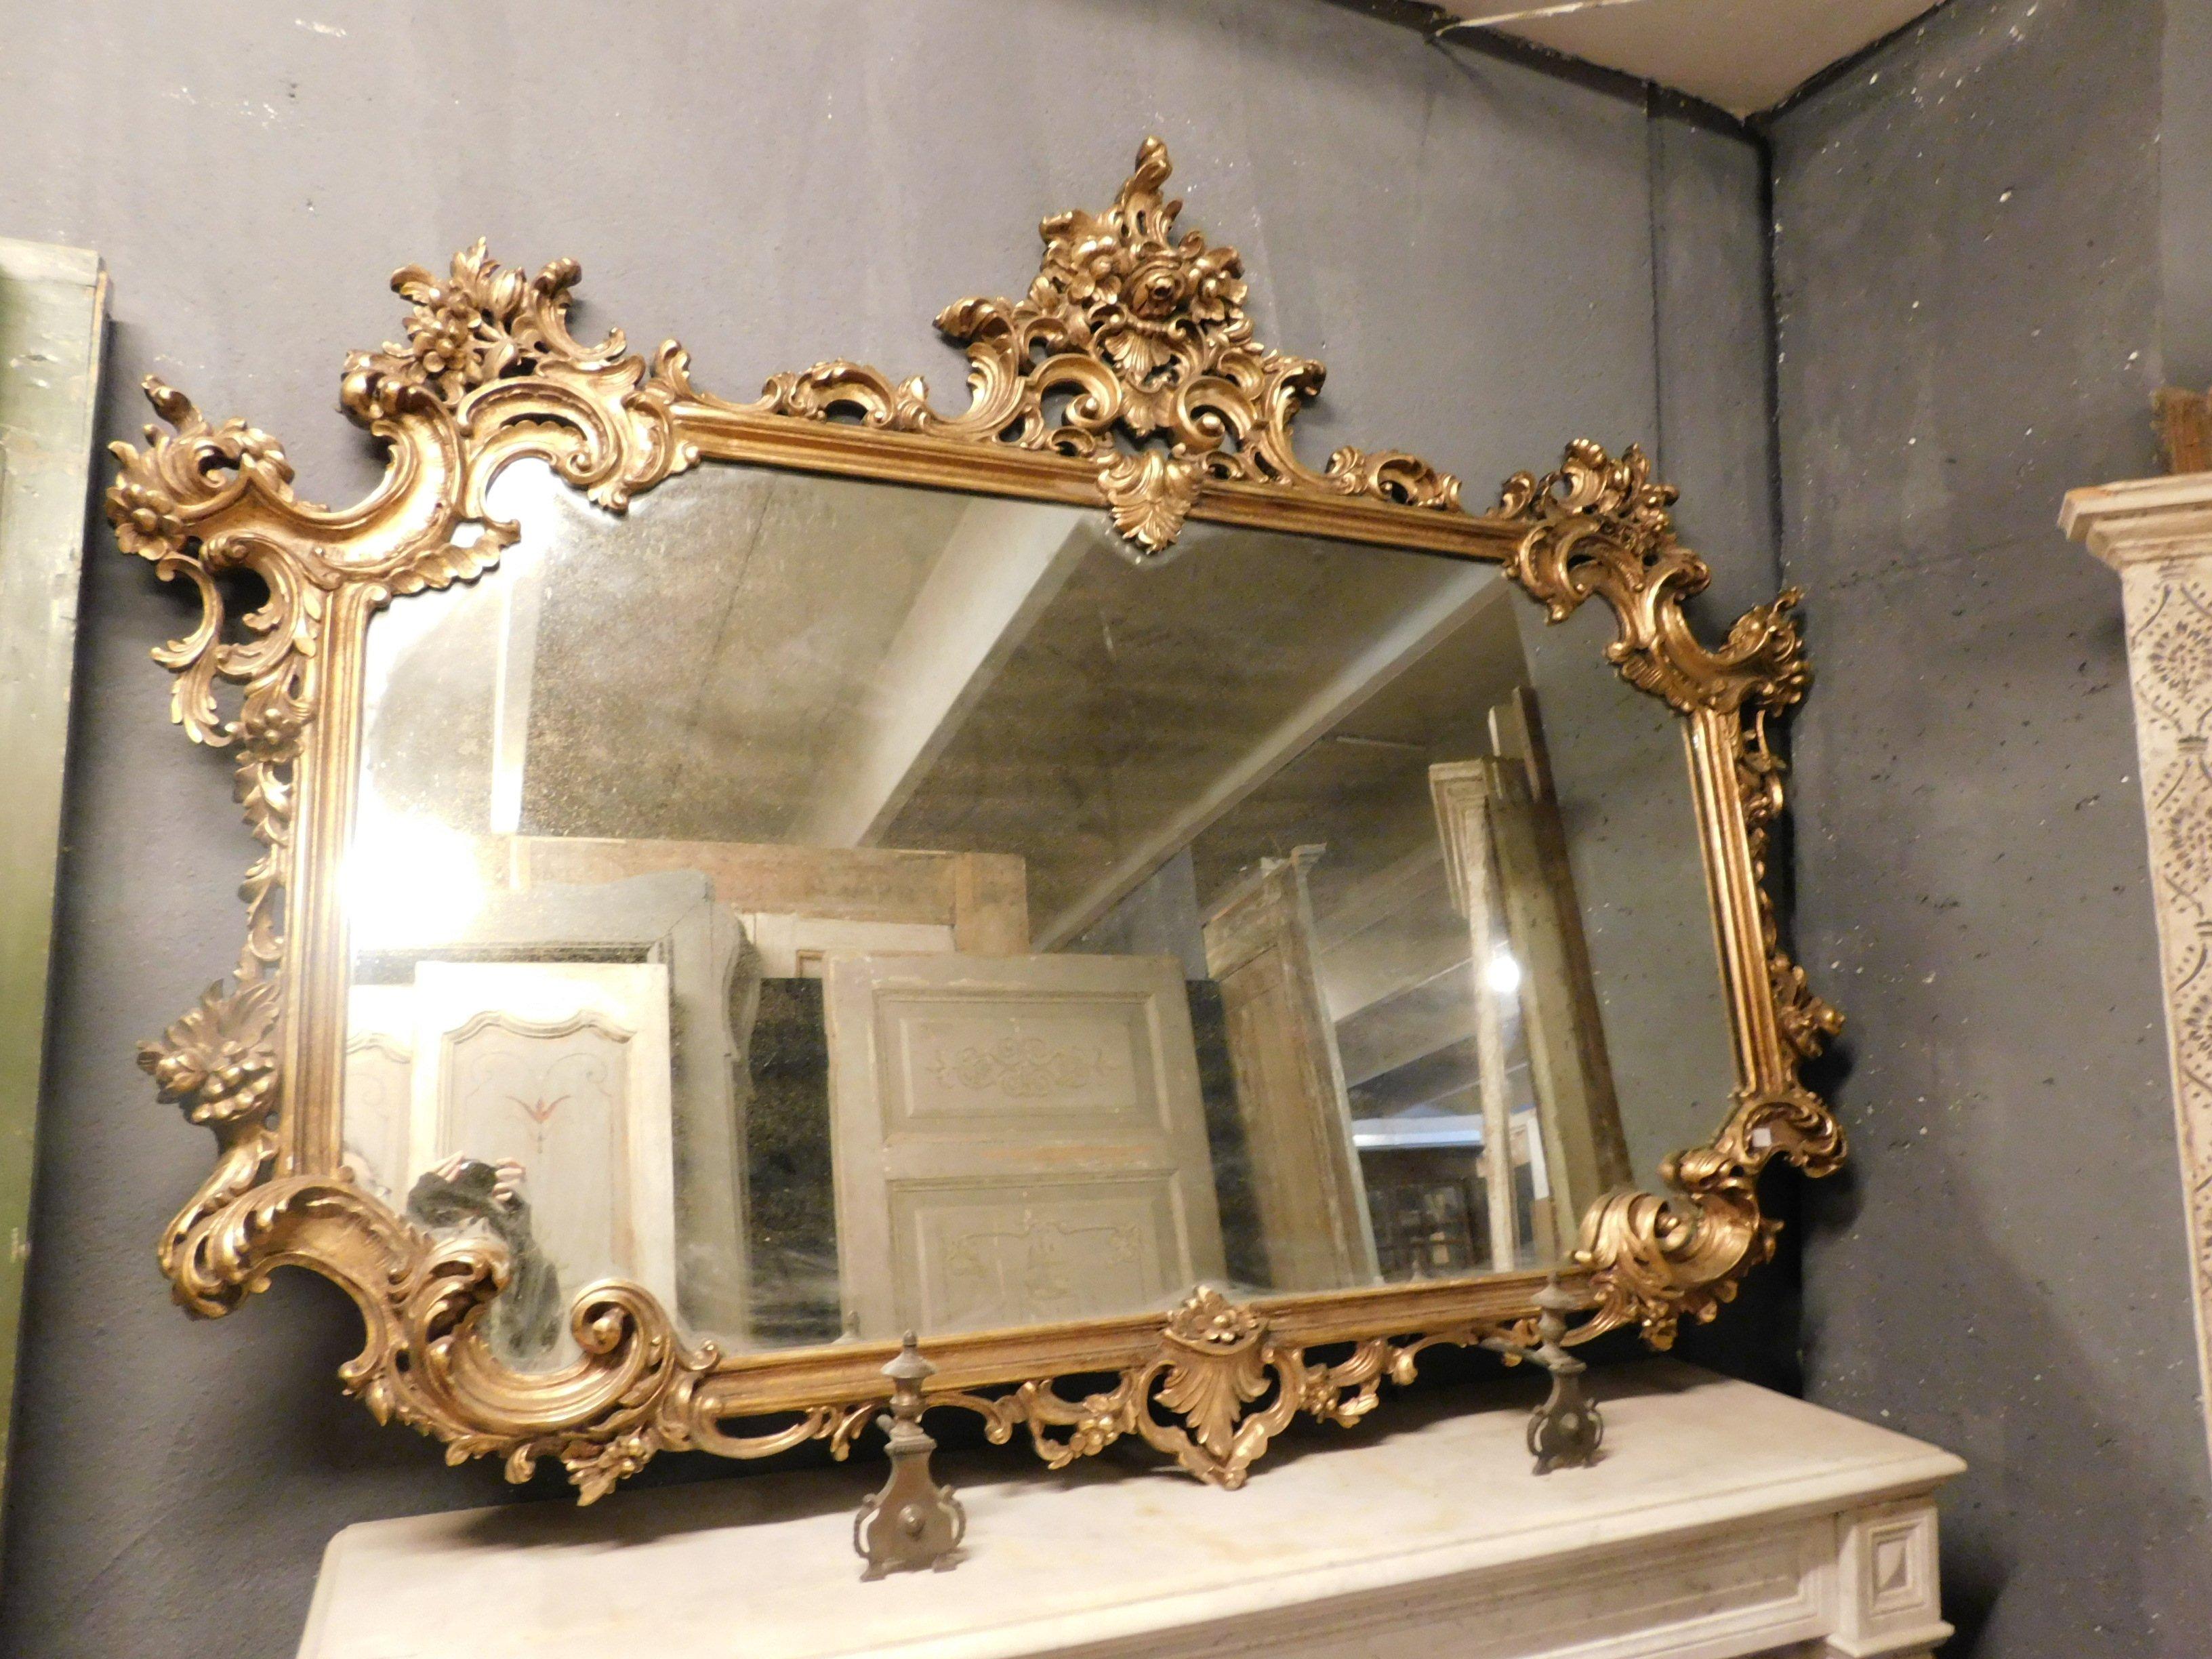 Vintage / antique gilded and richly carved mirror, rectangular / oval in shape, therefore adaptable also in a luxury bathroom, beautiful original gilding, built in the first half of the 20th century in Italy.
Great scenic impact and beautiful